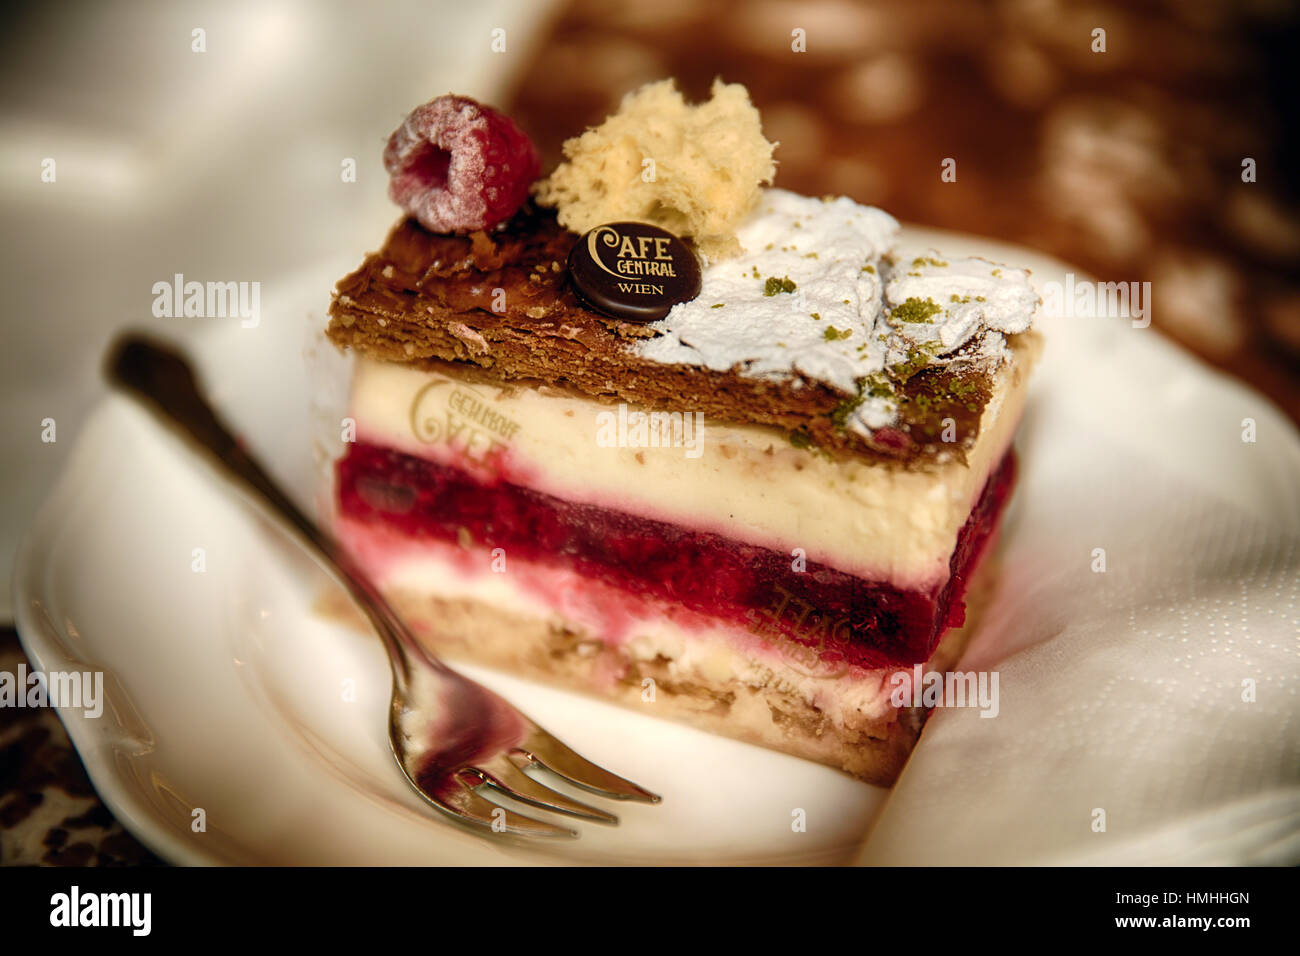 Close Up View of a Layered Cream Cake with Raspberry (Sommerkuss), Cafe Central, Vienna, Austria Stock Photo